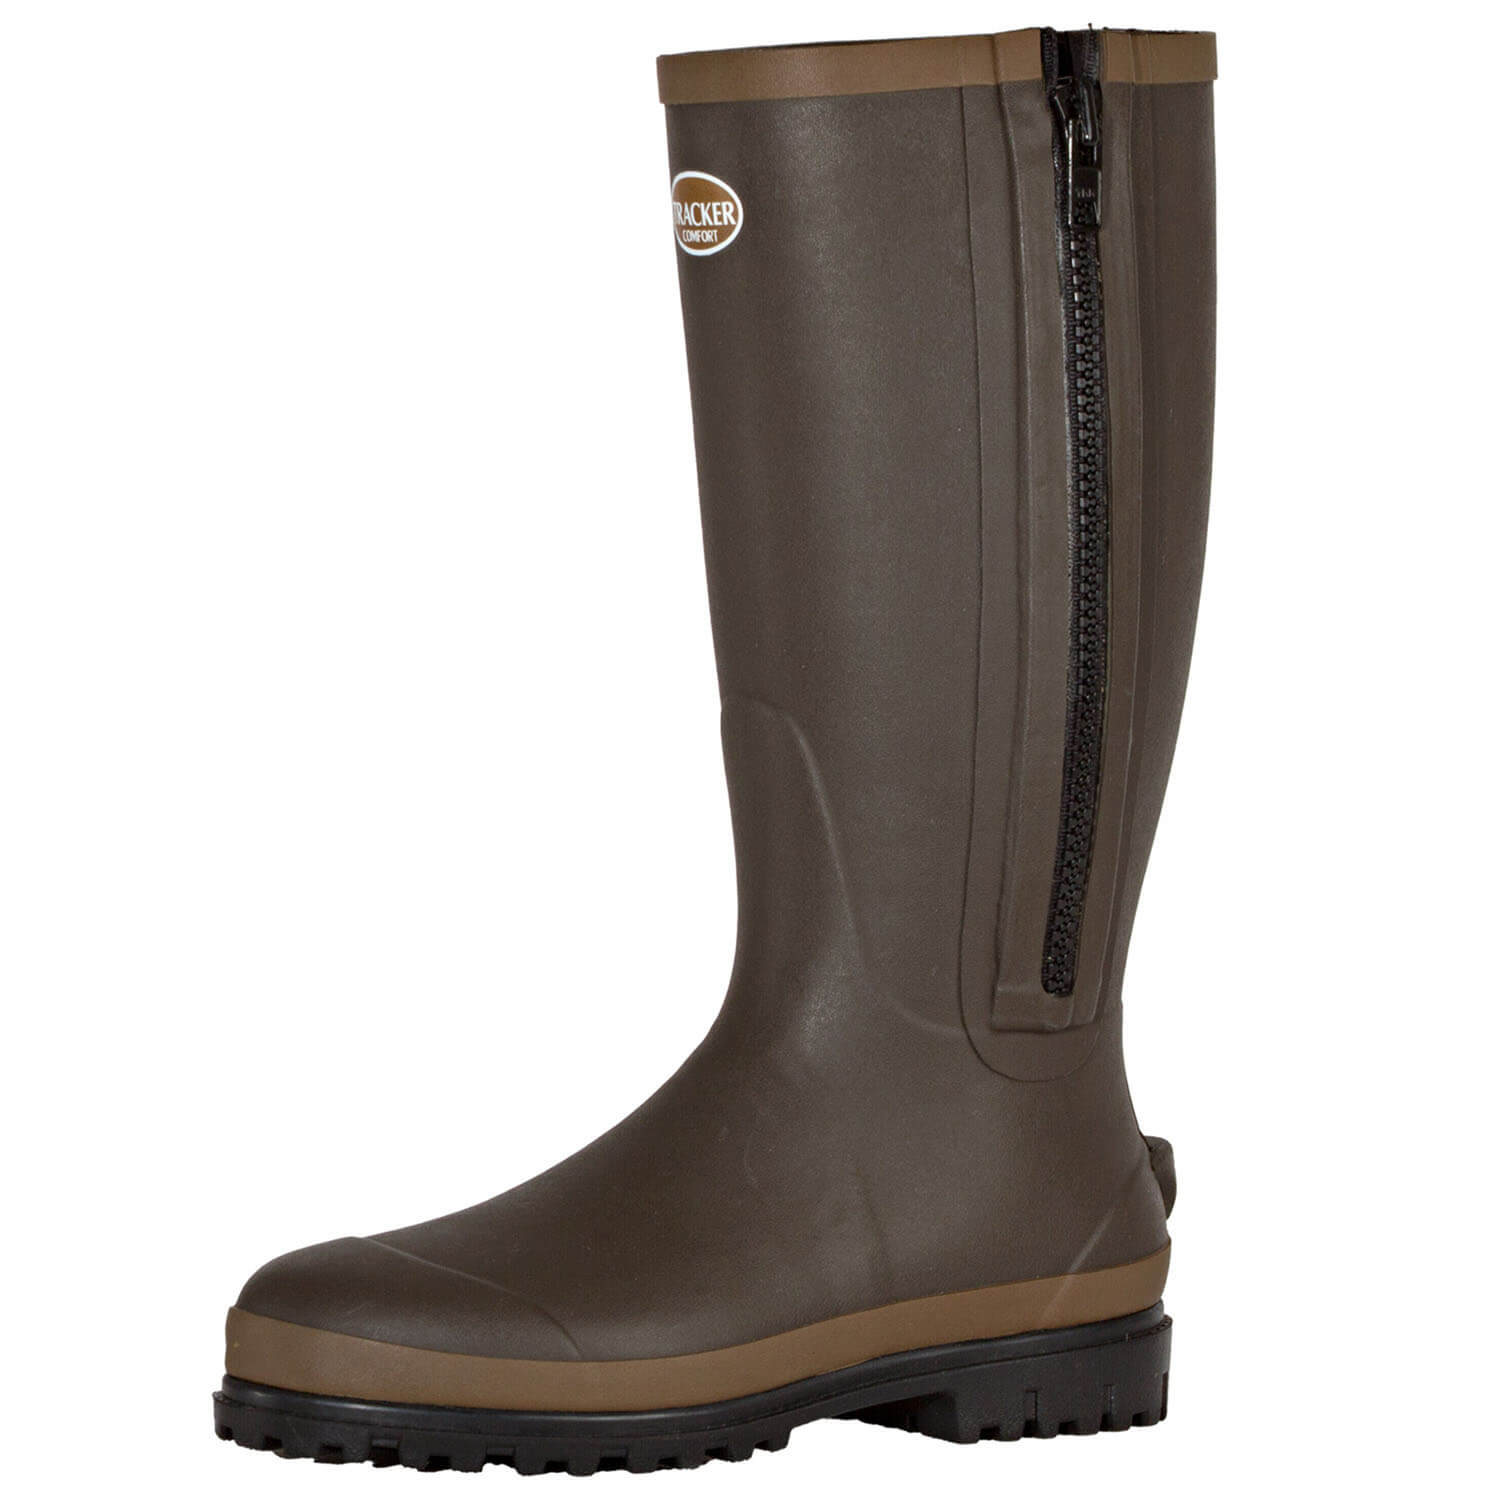 Tracker Rubber Boots Comfort Jersey (brown) - Rubber Boots